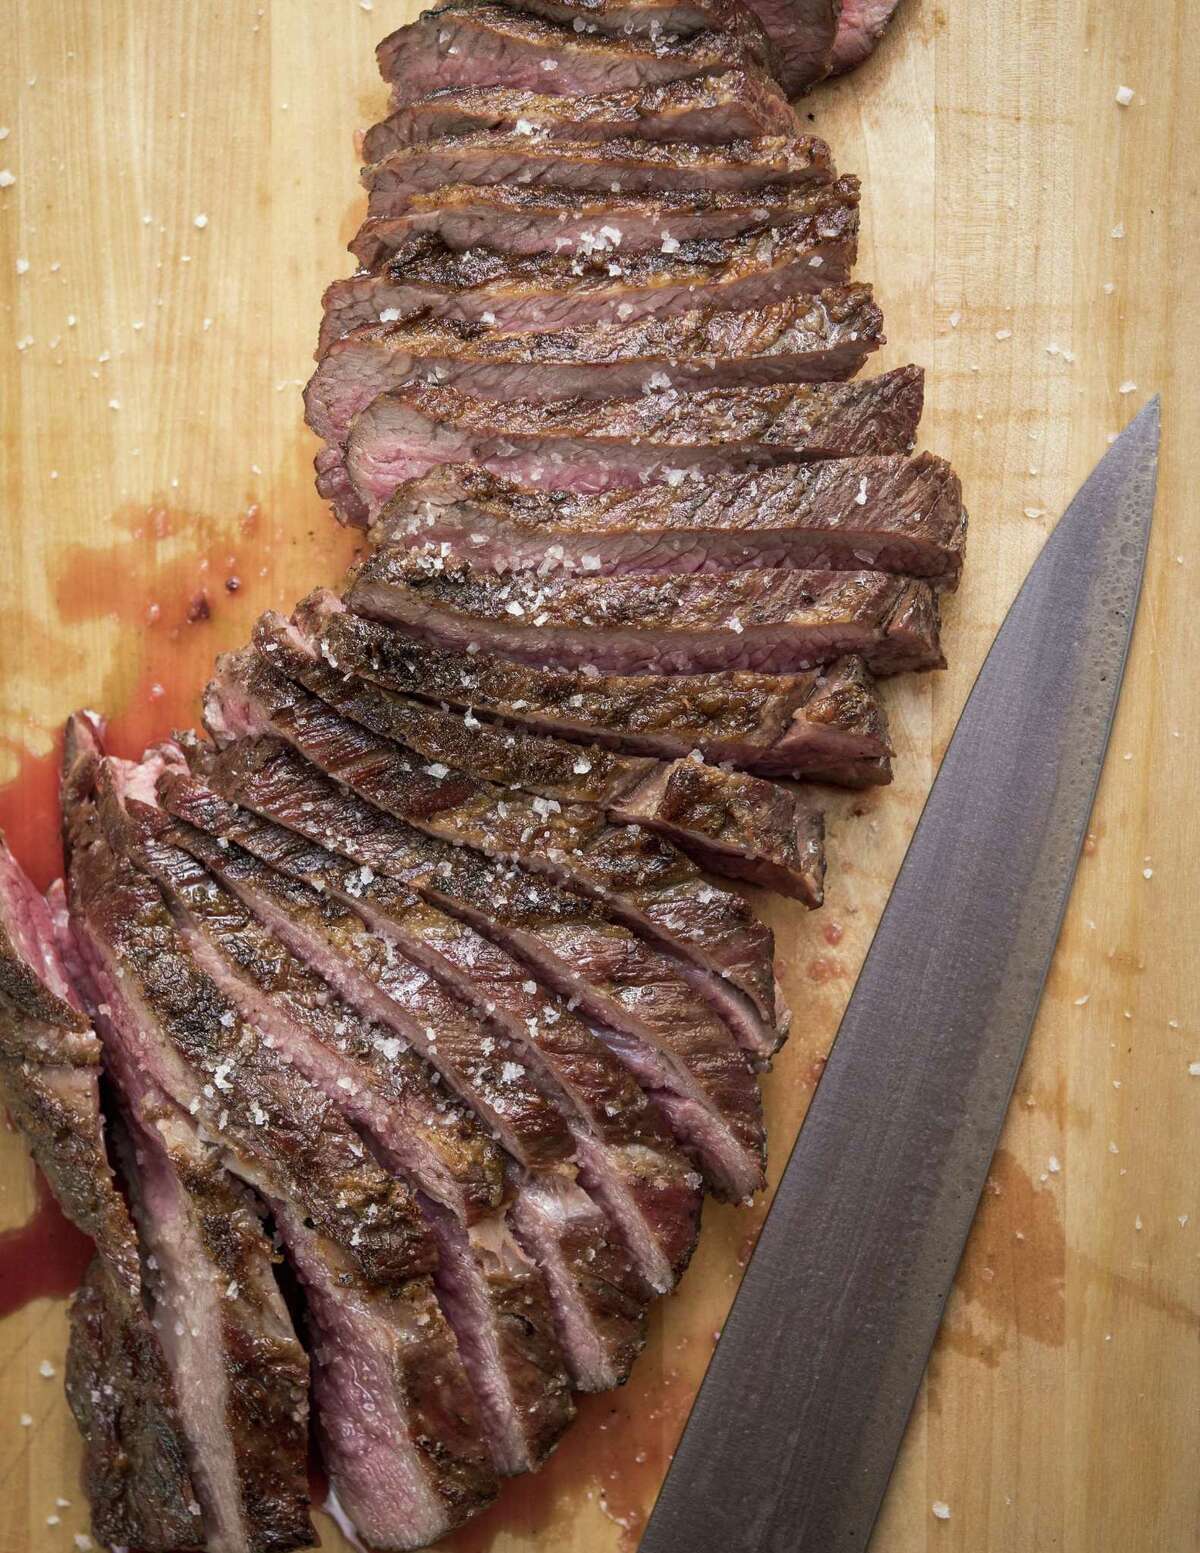 "Franklin Steak" by Aaron Franklin and Jordan Mackay is a new guide for cooking a perfect steak.